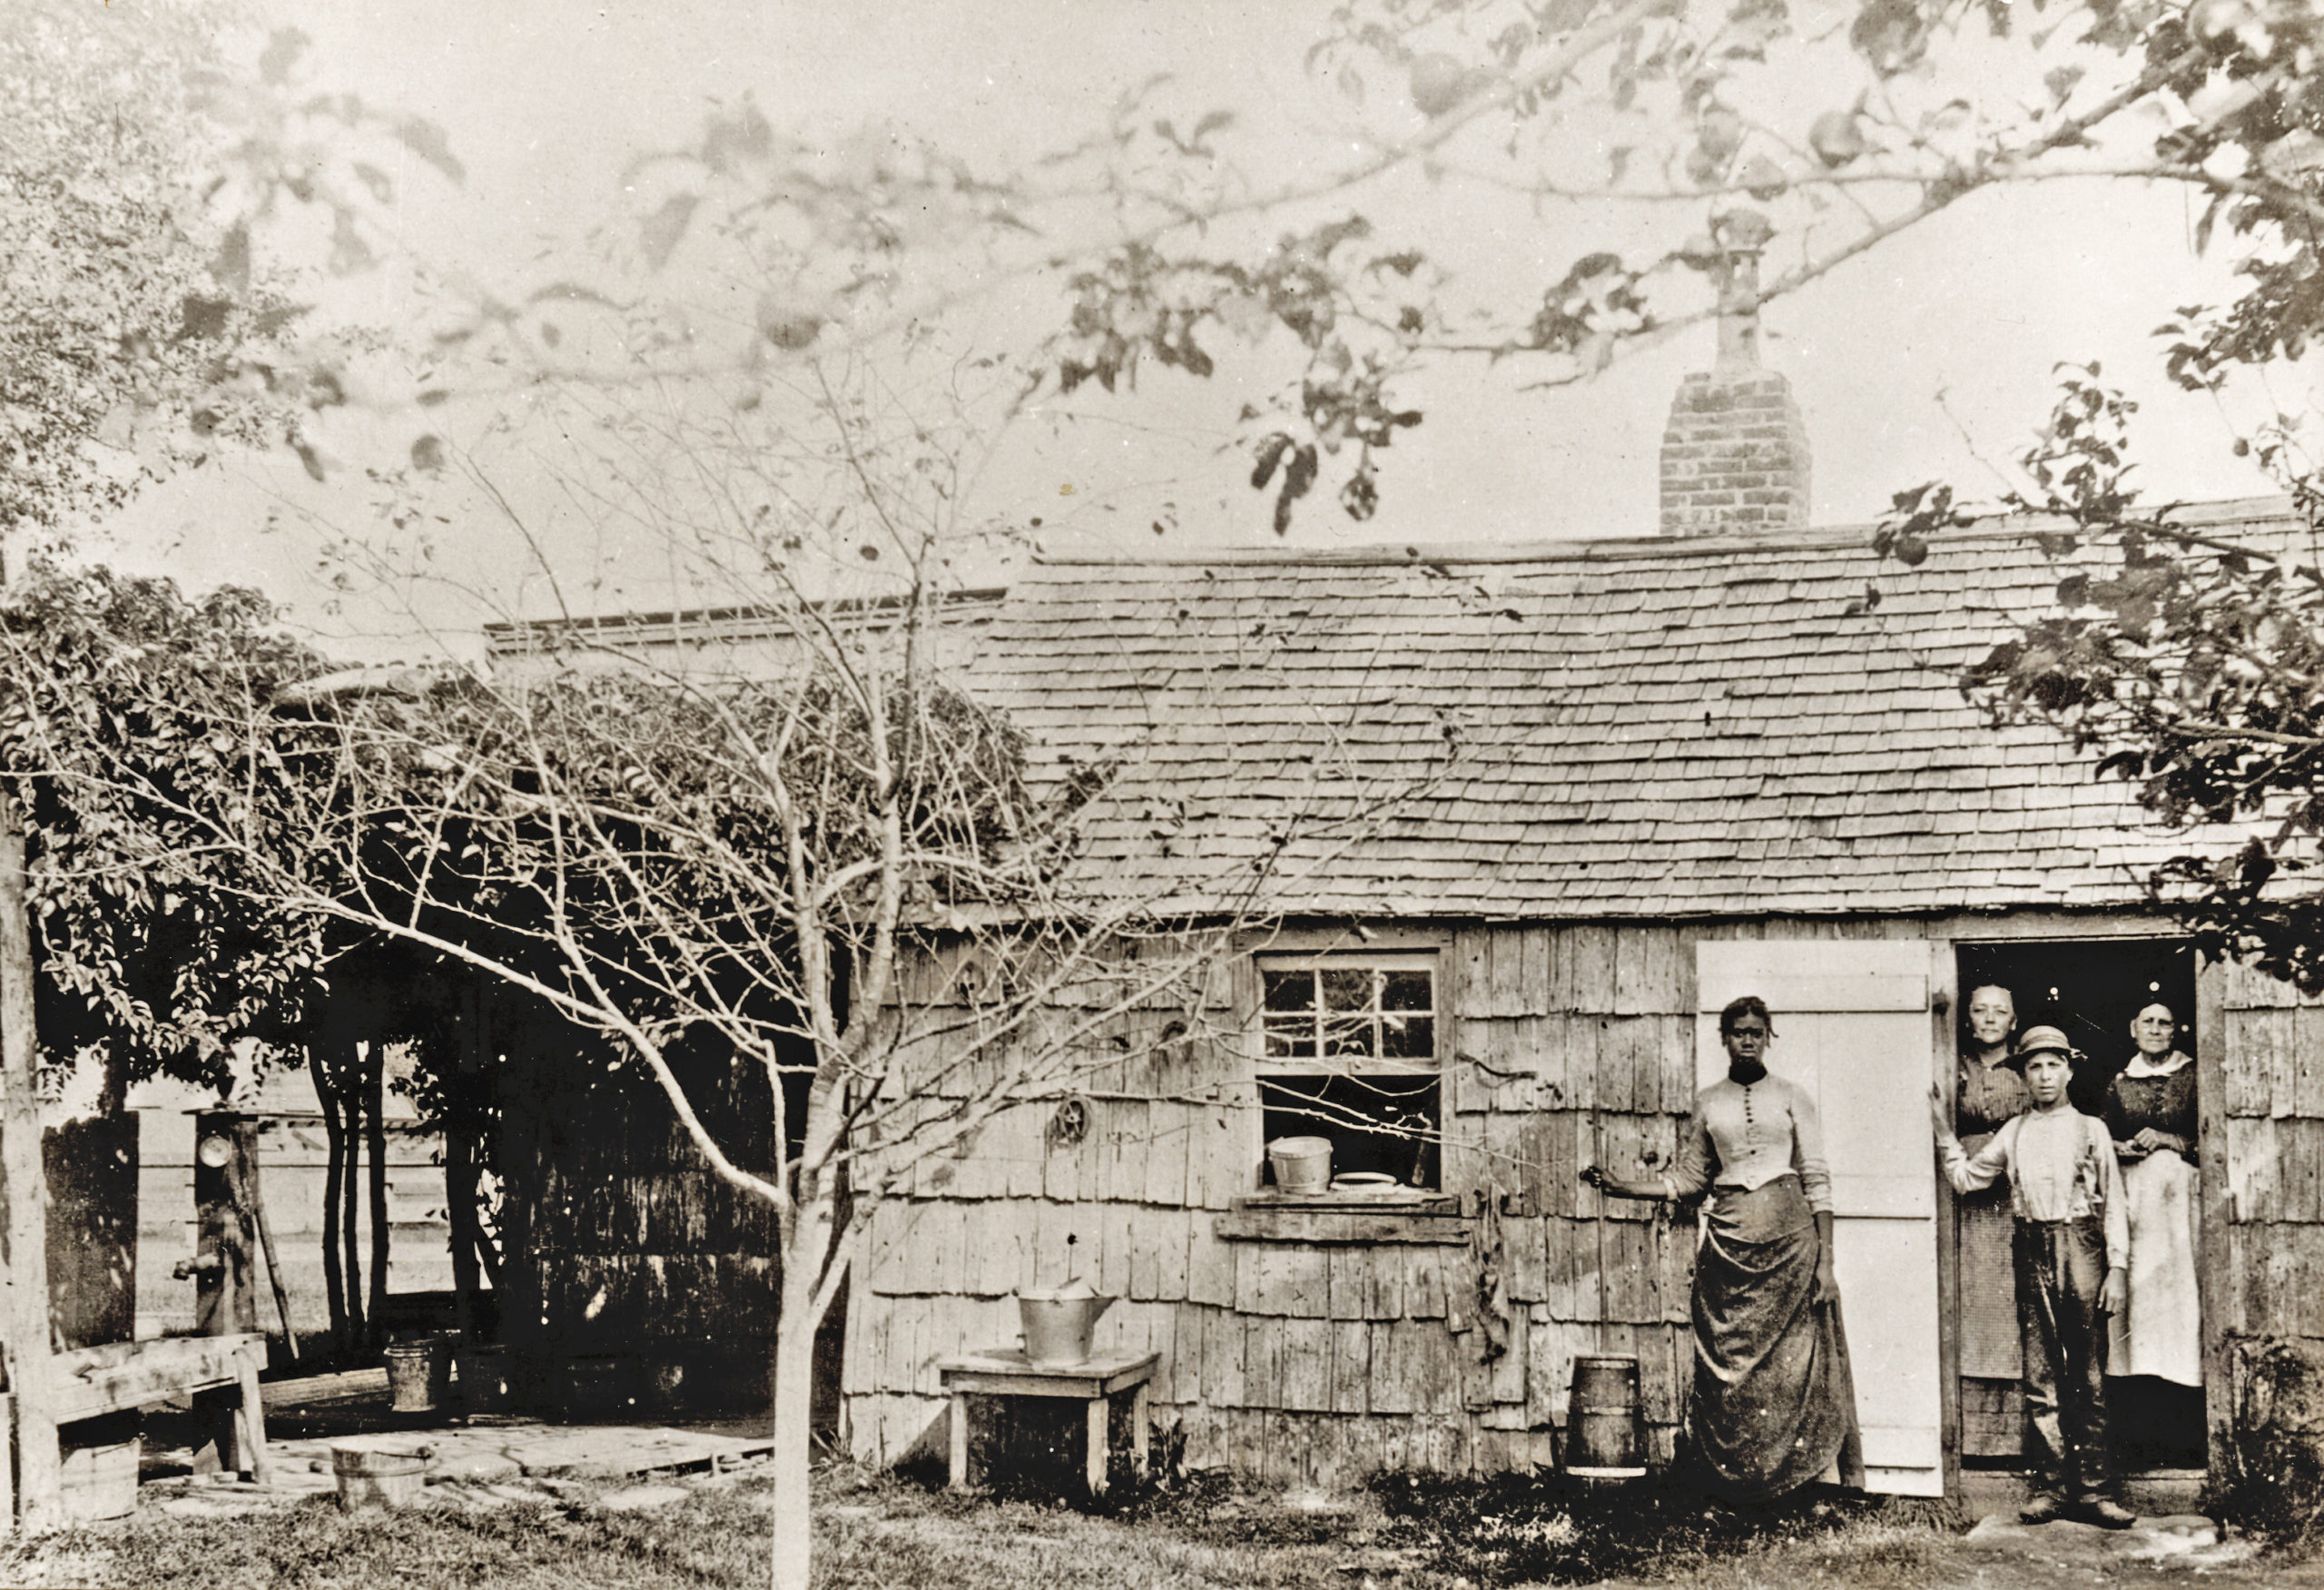 The Stratton Dayton house was in East Hampton, in the present-day Village of East Hampton. The date of this 19th century photograph and the names of the people in it are not known.   Courtesy Plain Sight Project